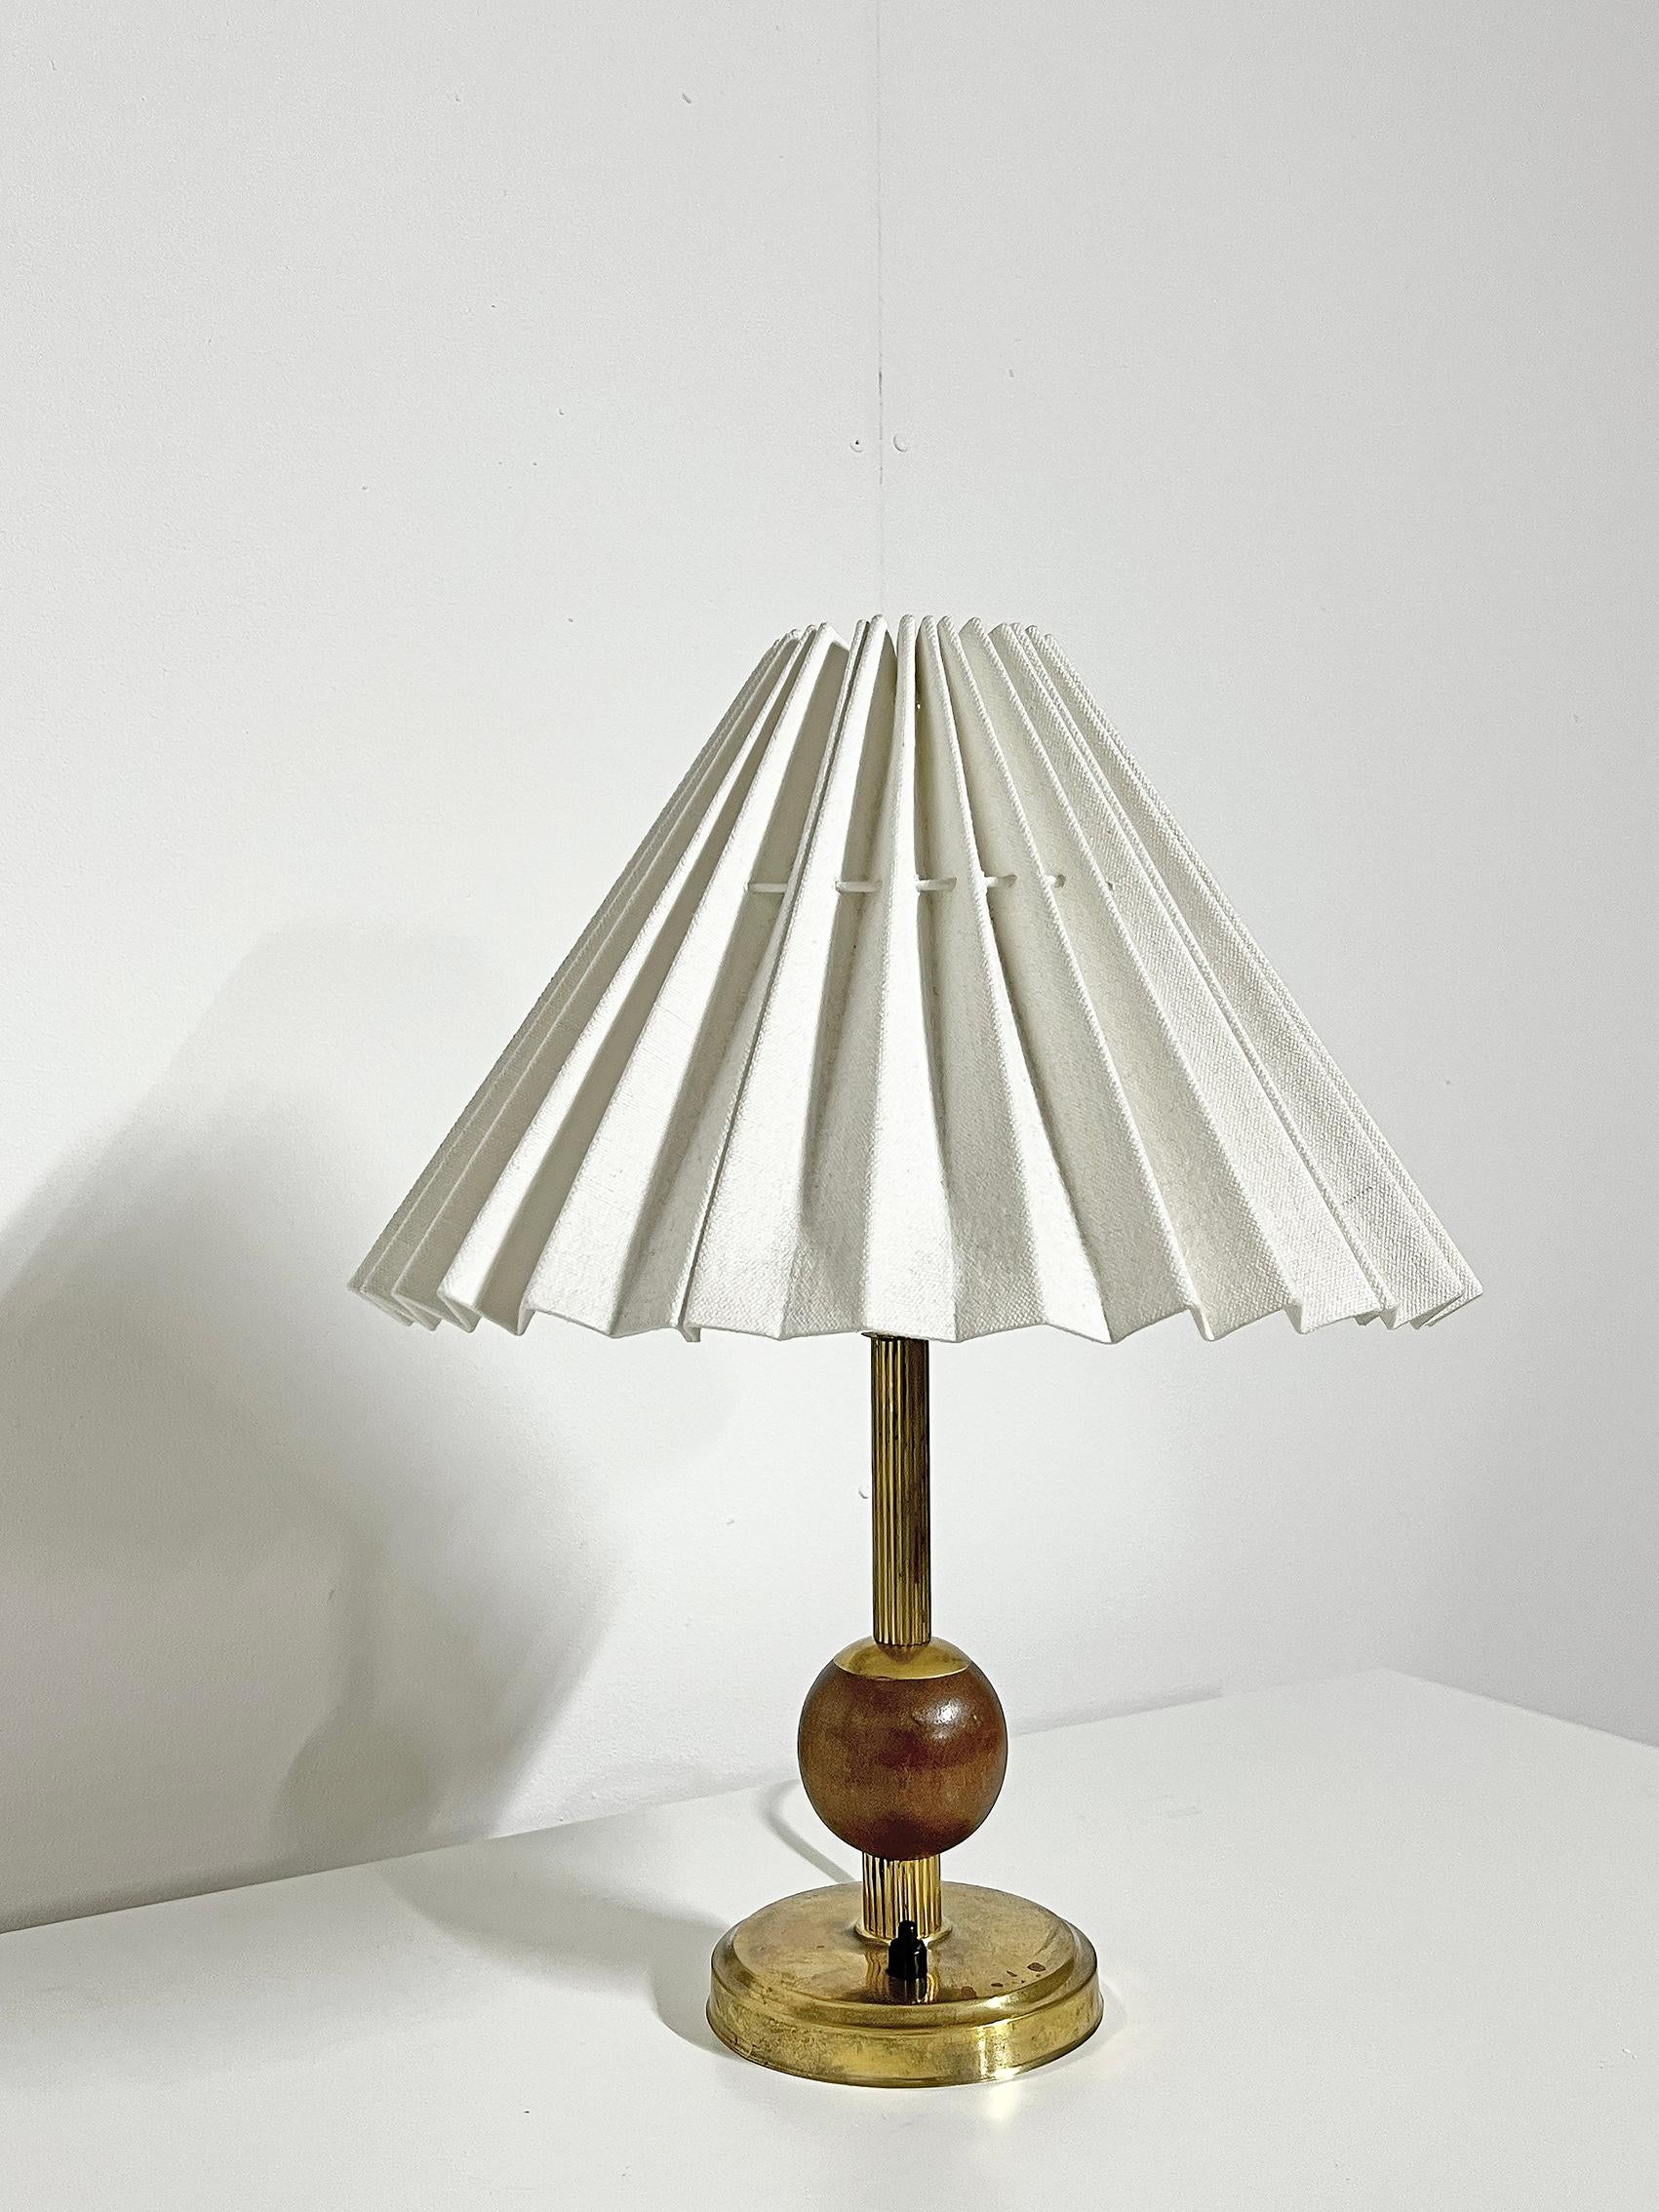 Scandinavian Modern table lamp in brass and wood ca 1960's. Anonymous. 
Wear and patina consistent with age and use. Some rust spots. Small crack on the base, see last picture. 
Please notice, the shade is not included!  
Original wiring. We